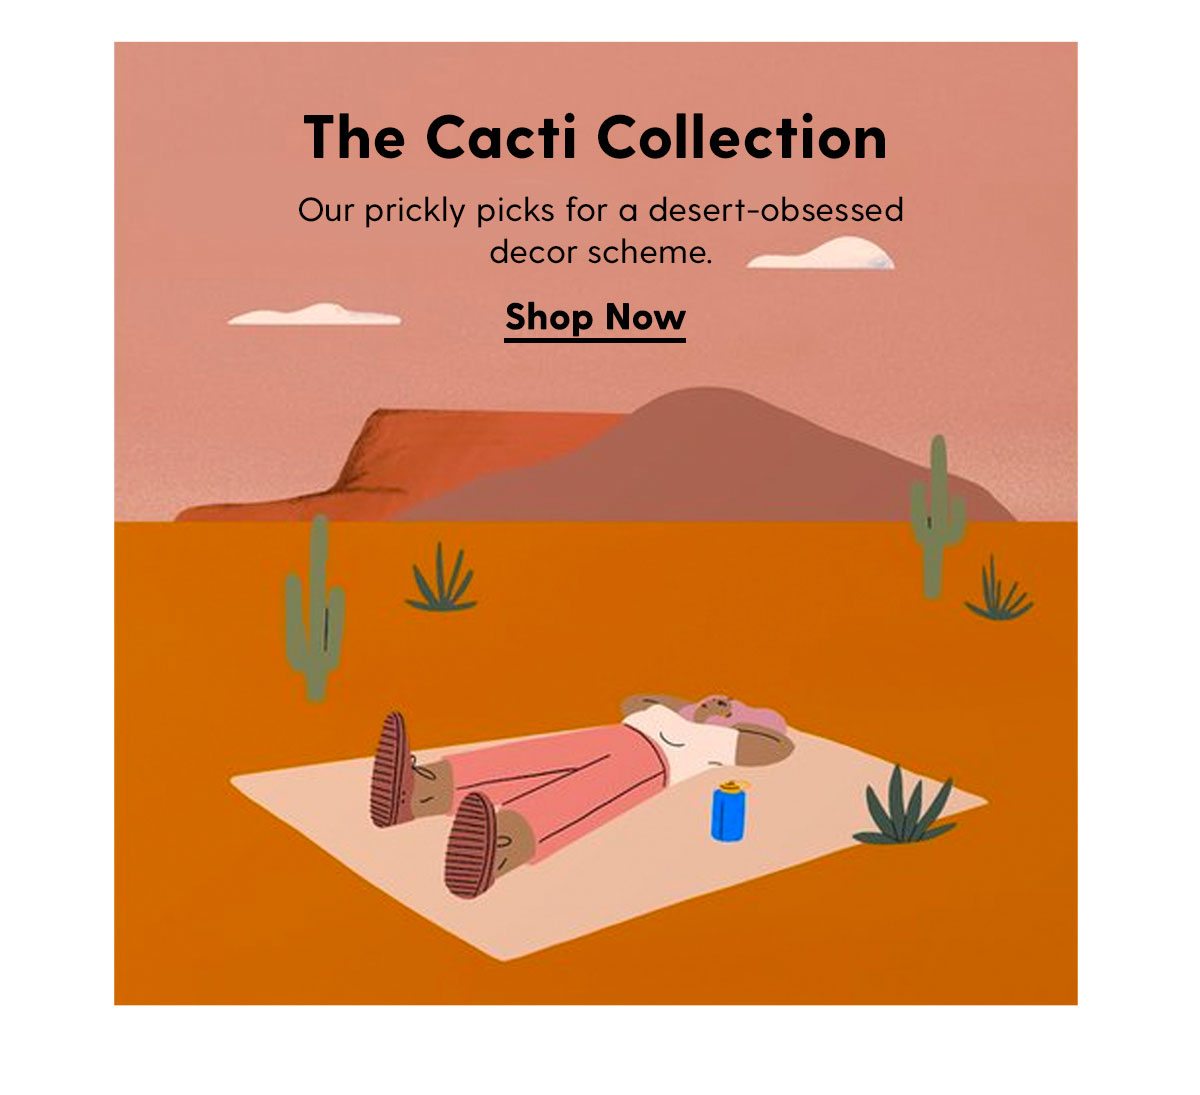 The Cacti Collection: Our prickly picks for a desert-obsessed decor scheme. Shop Now